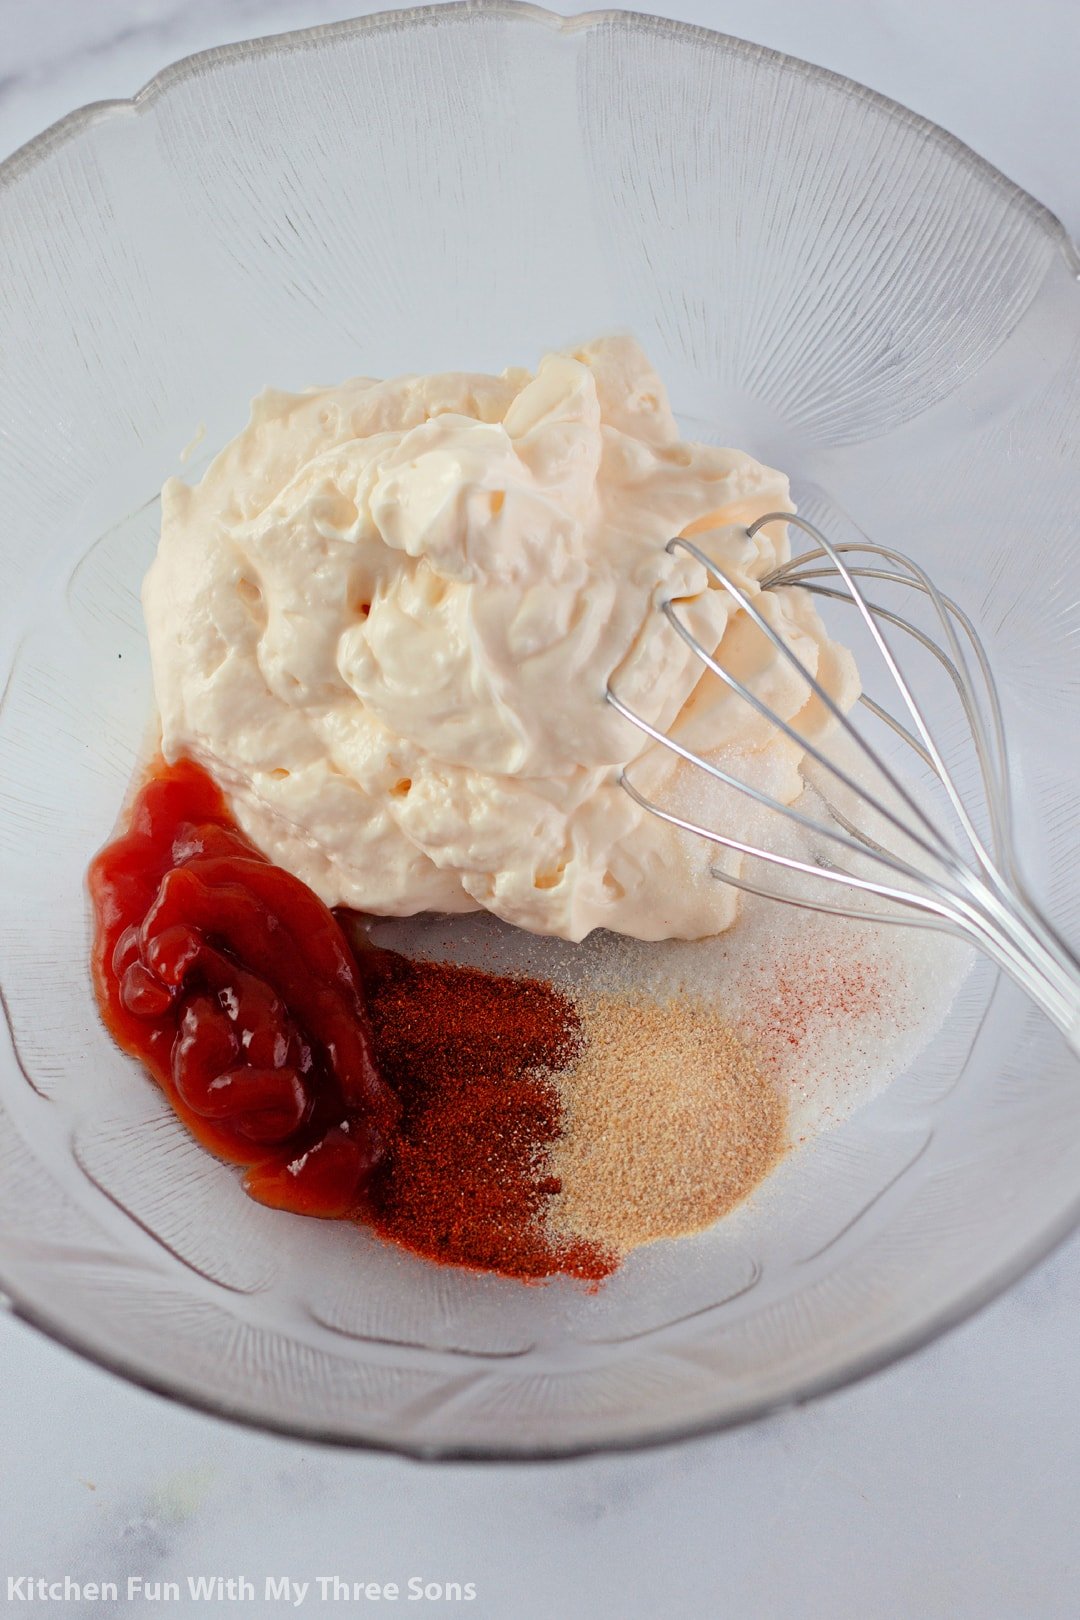 whisking together mayonnaise, ketchup, sugar, and spices in a clear bowl.